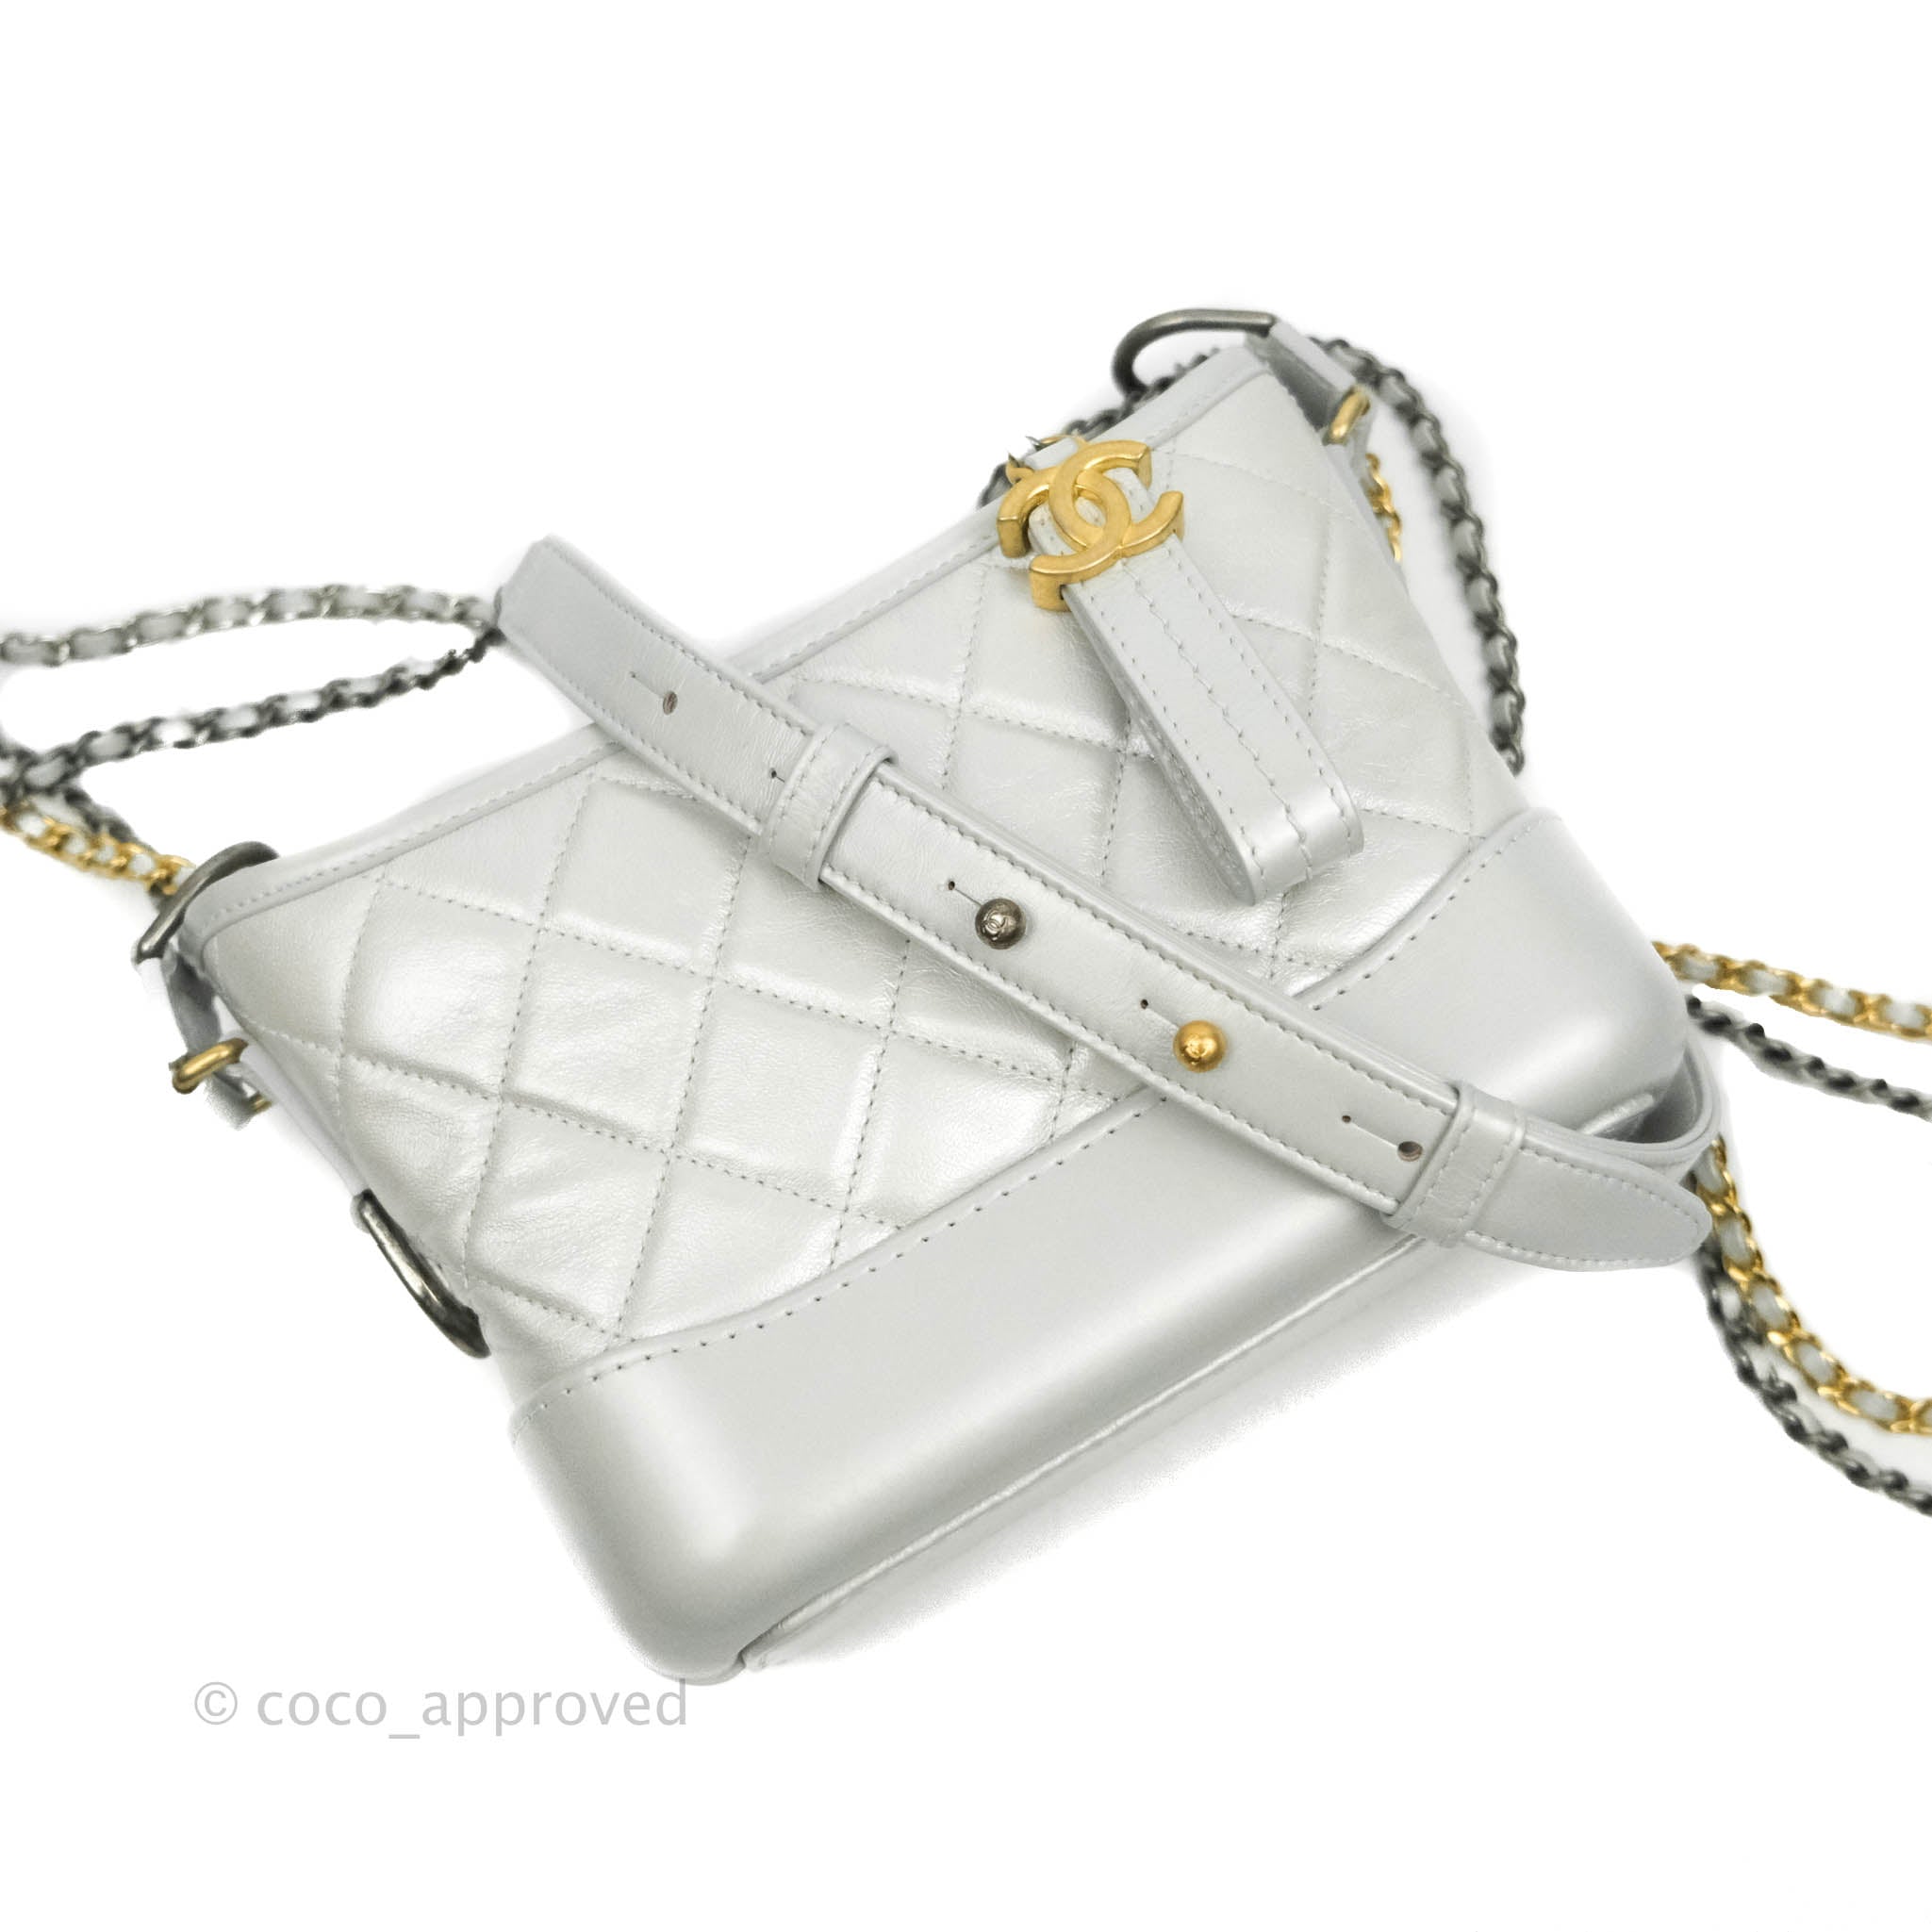 chanel gabrielle backpack white